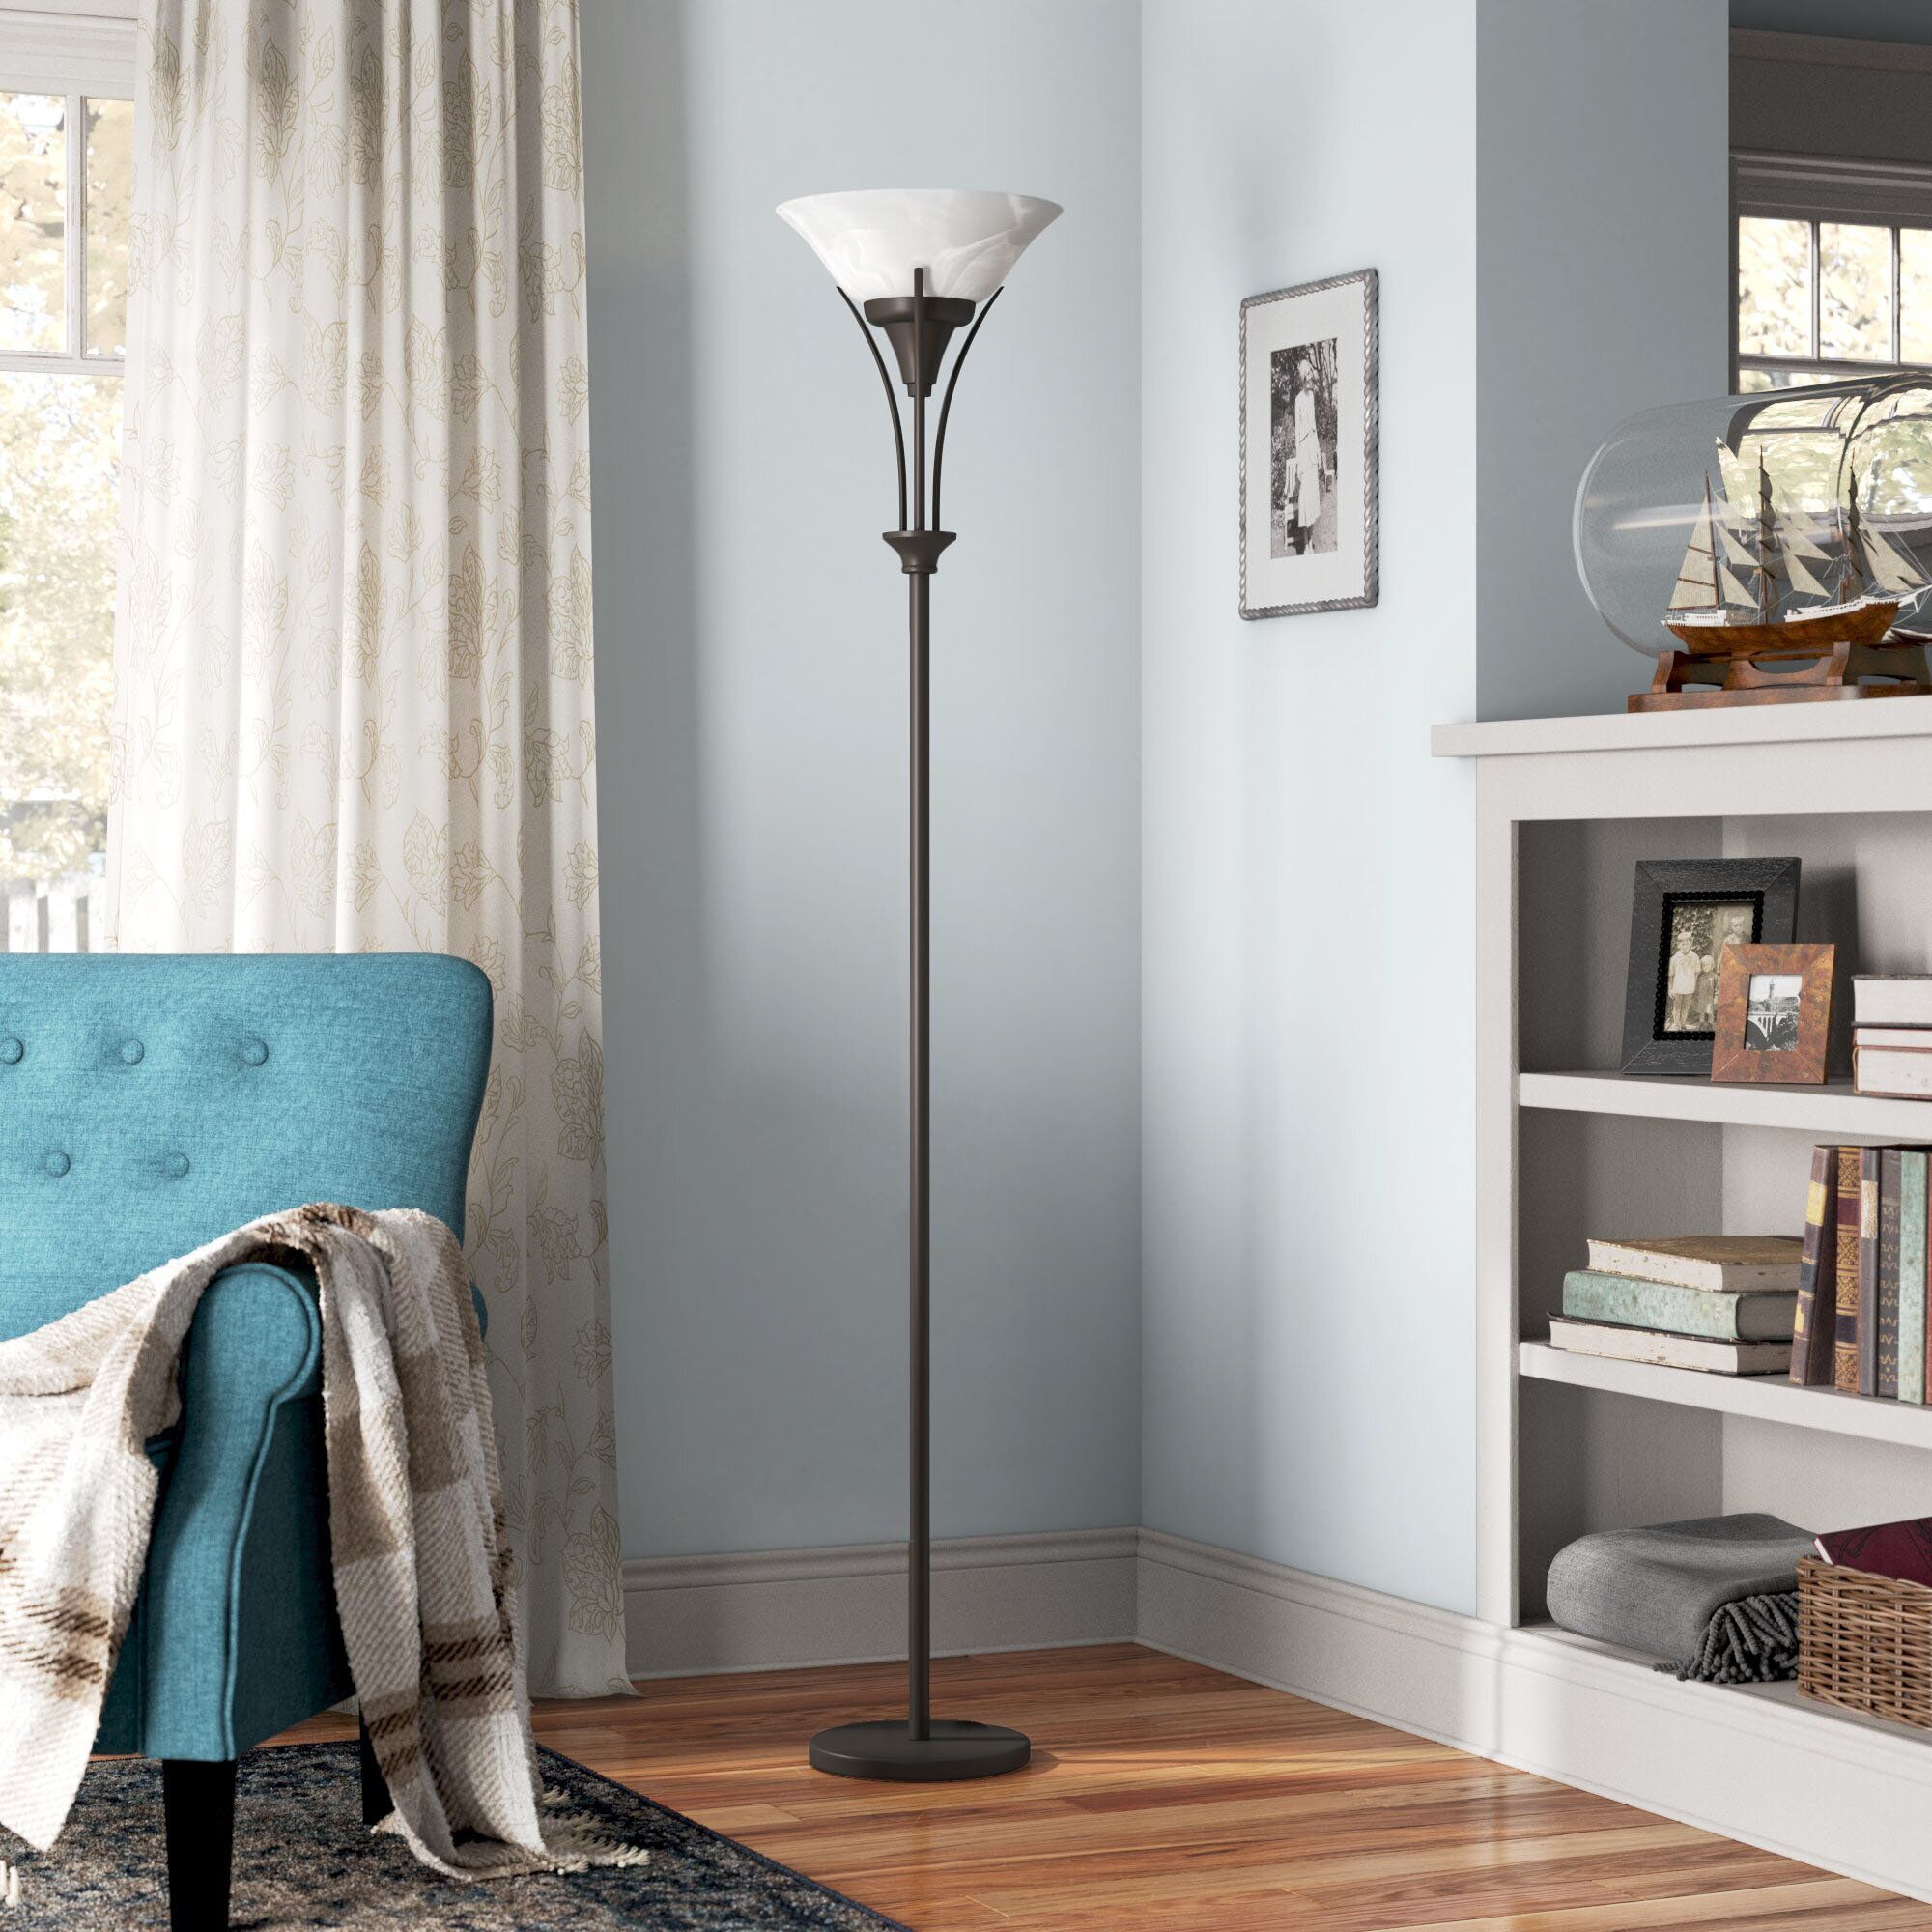 Wayfair | Extra Tall (70+ Inches) Floor Lamps Intended For 74 Inch Floor Lamps (View 13 of 15)